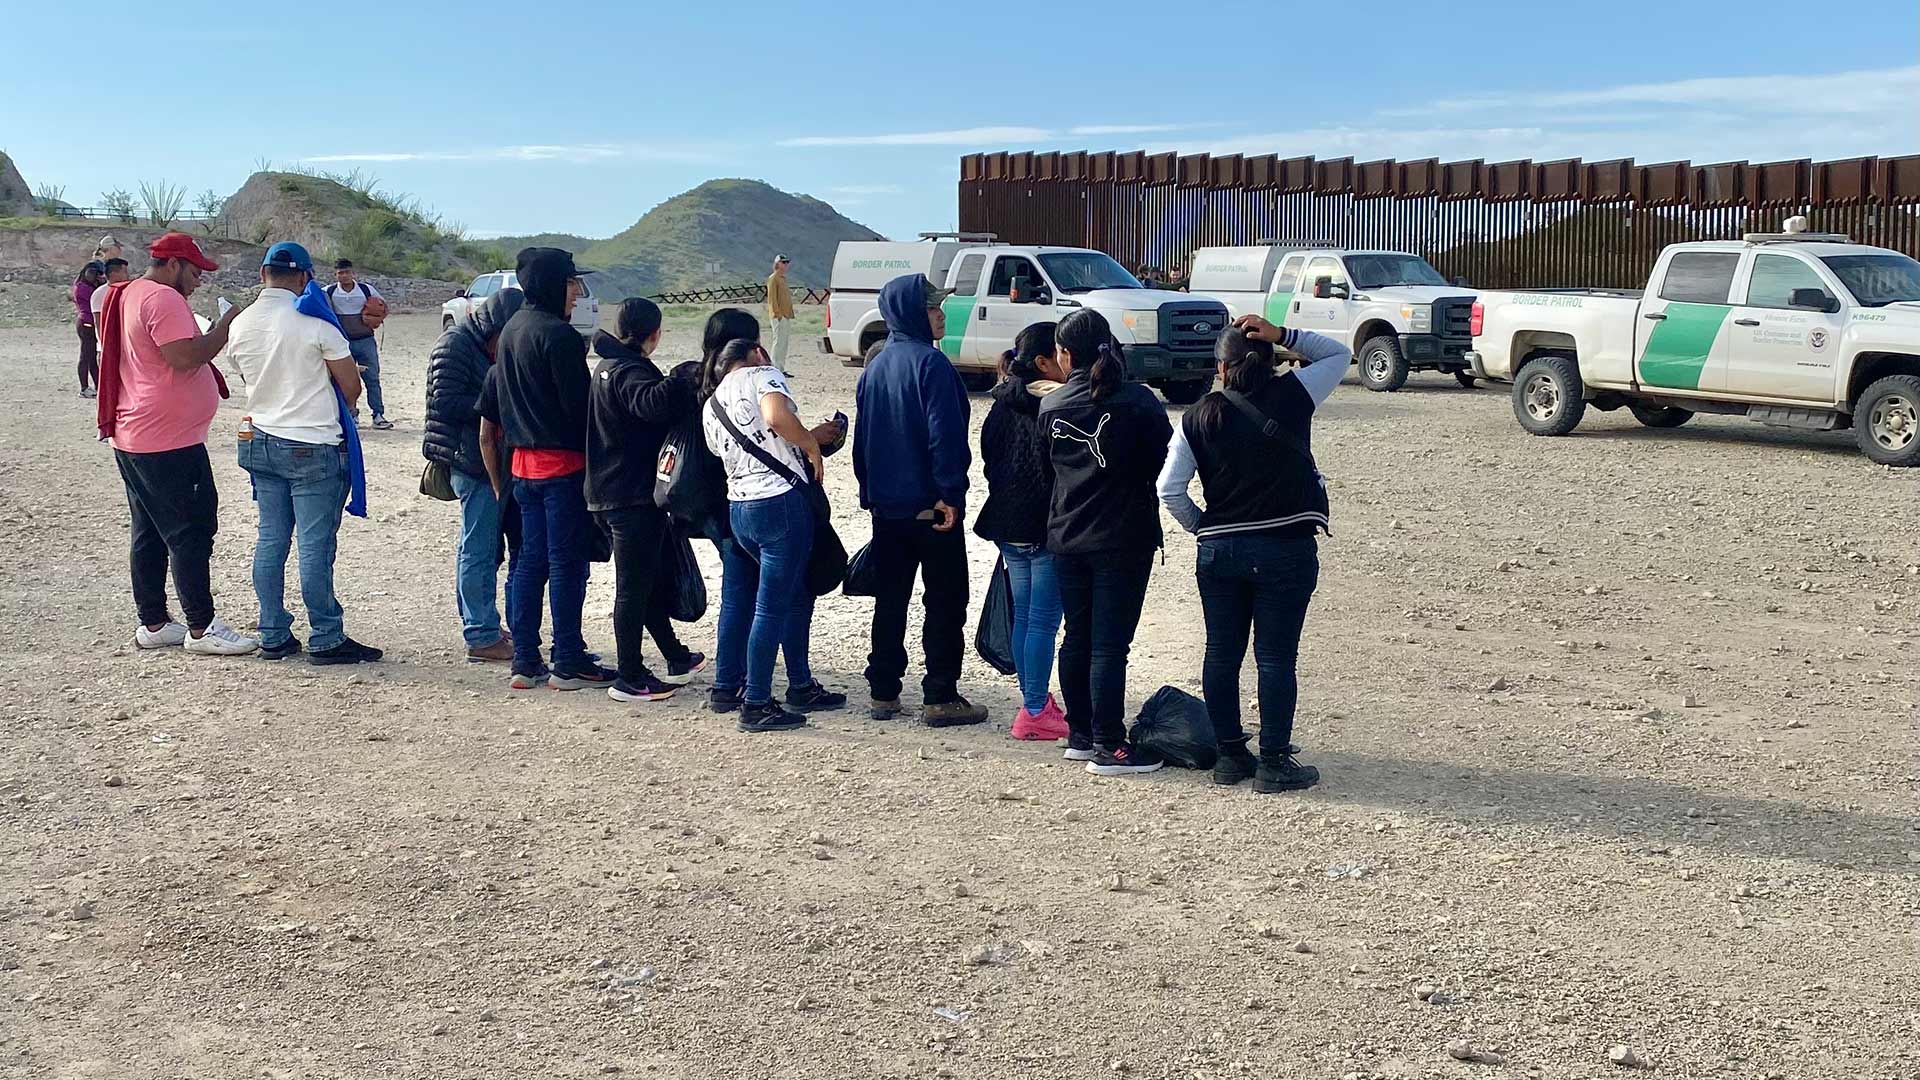 Number of migrants entering Arizona lowest in 3+ years